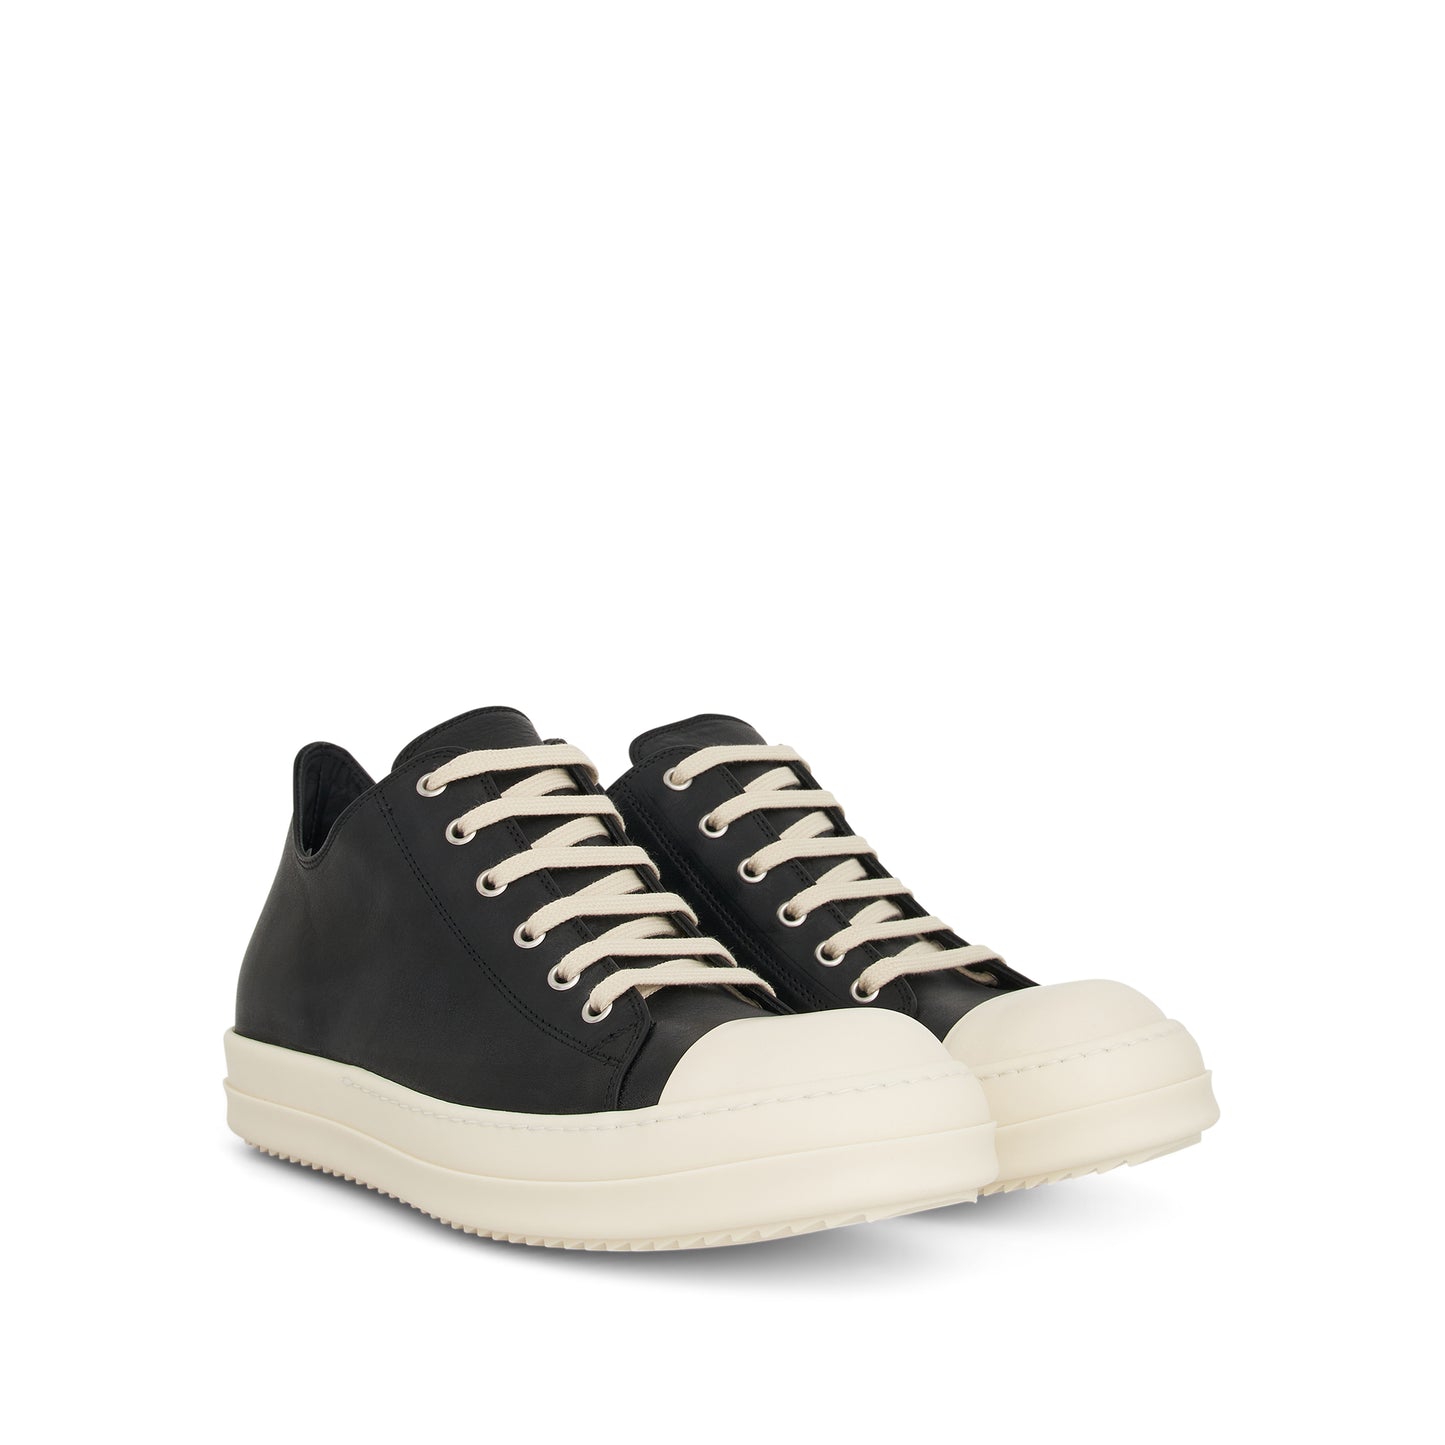 Washed Calf Low Top Leather Sneaker in Black/Milk